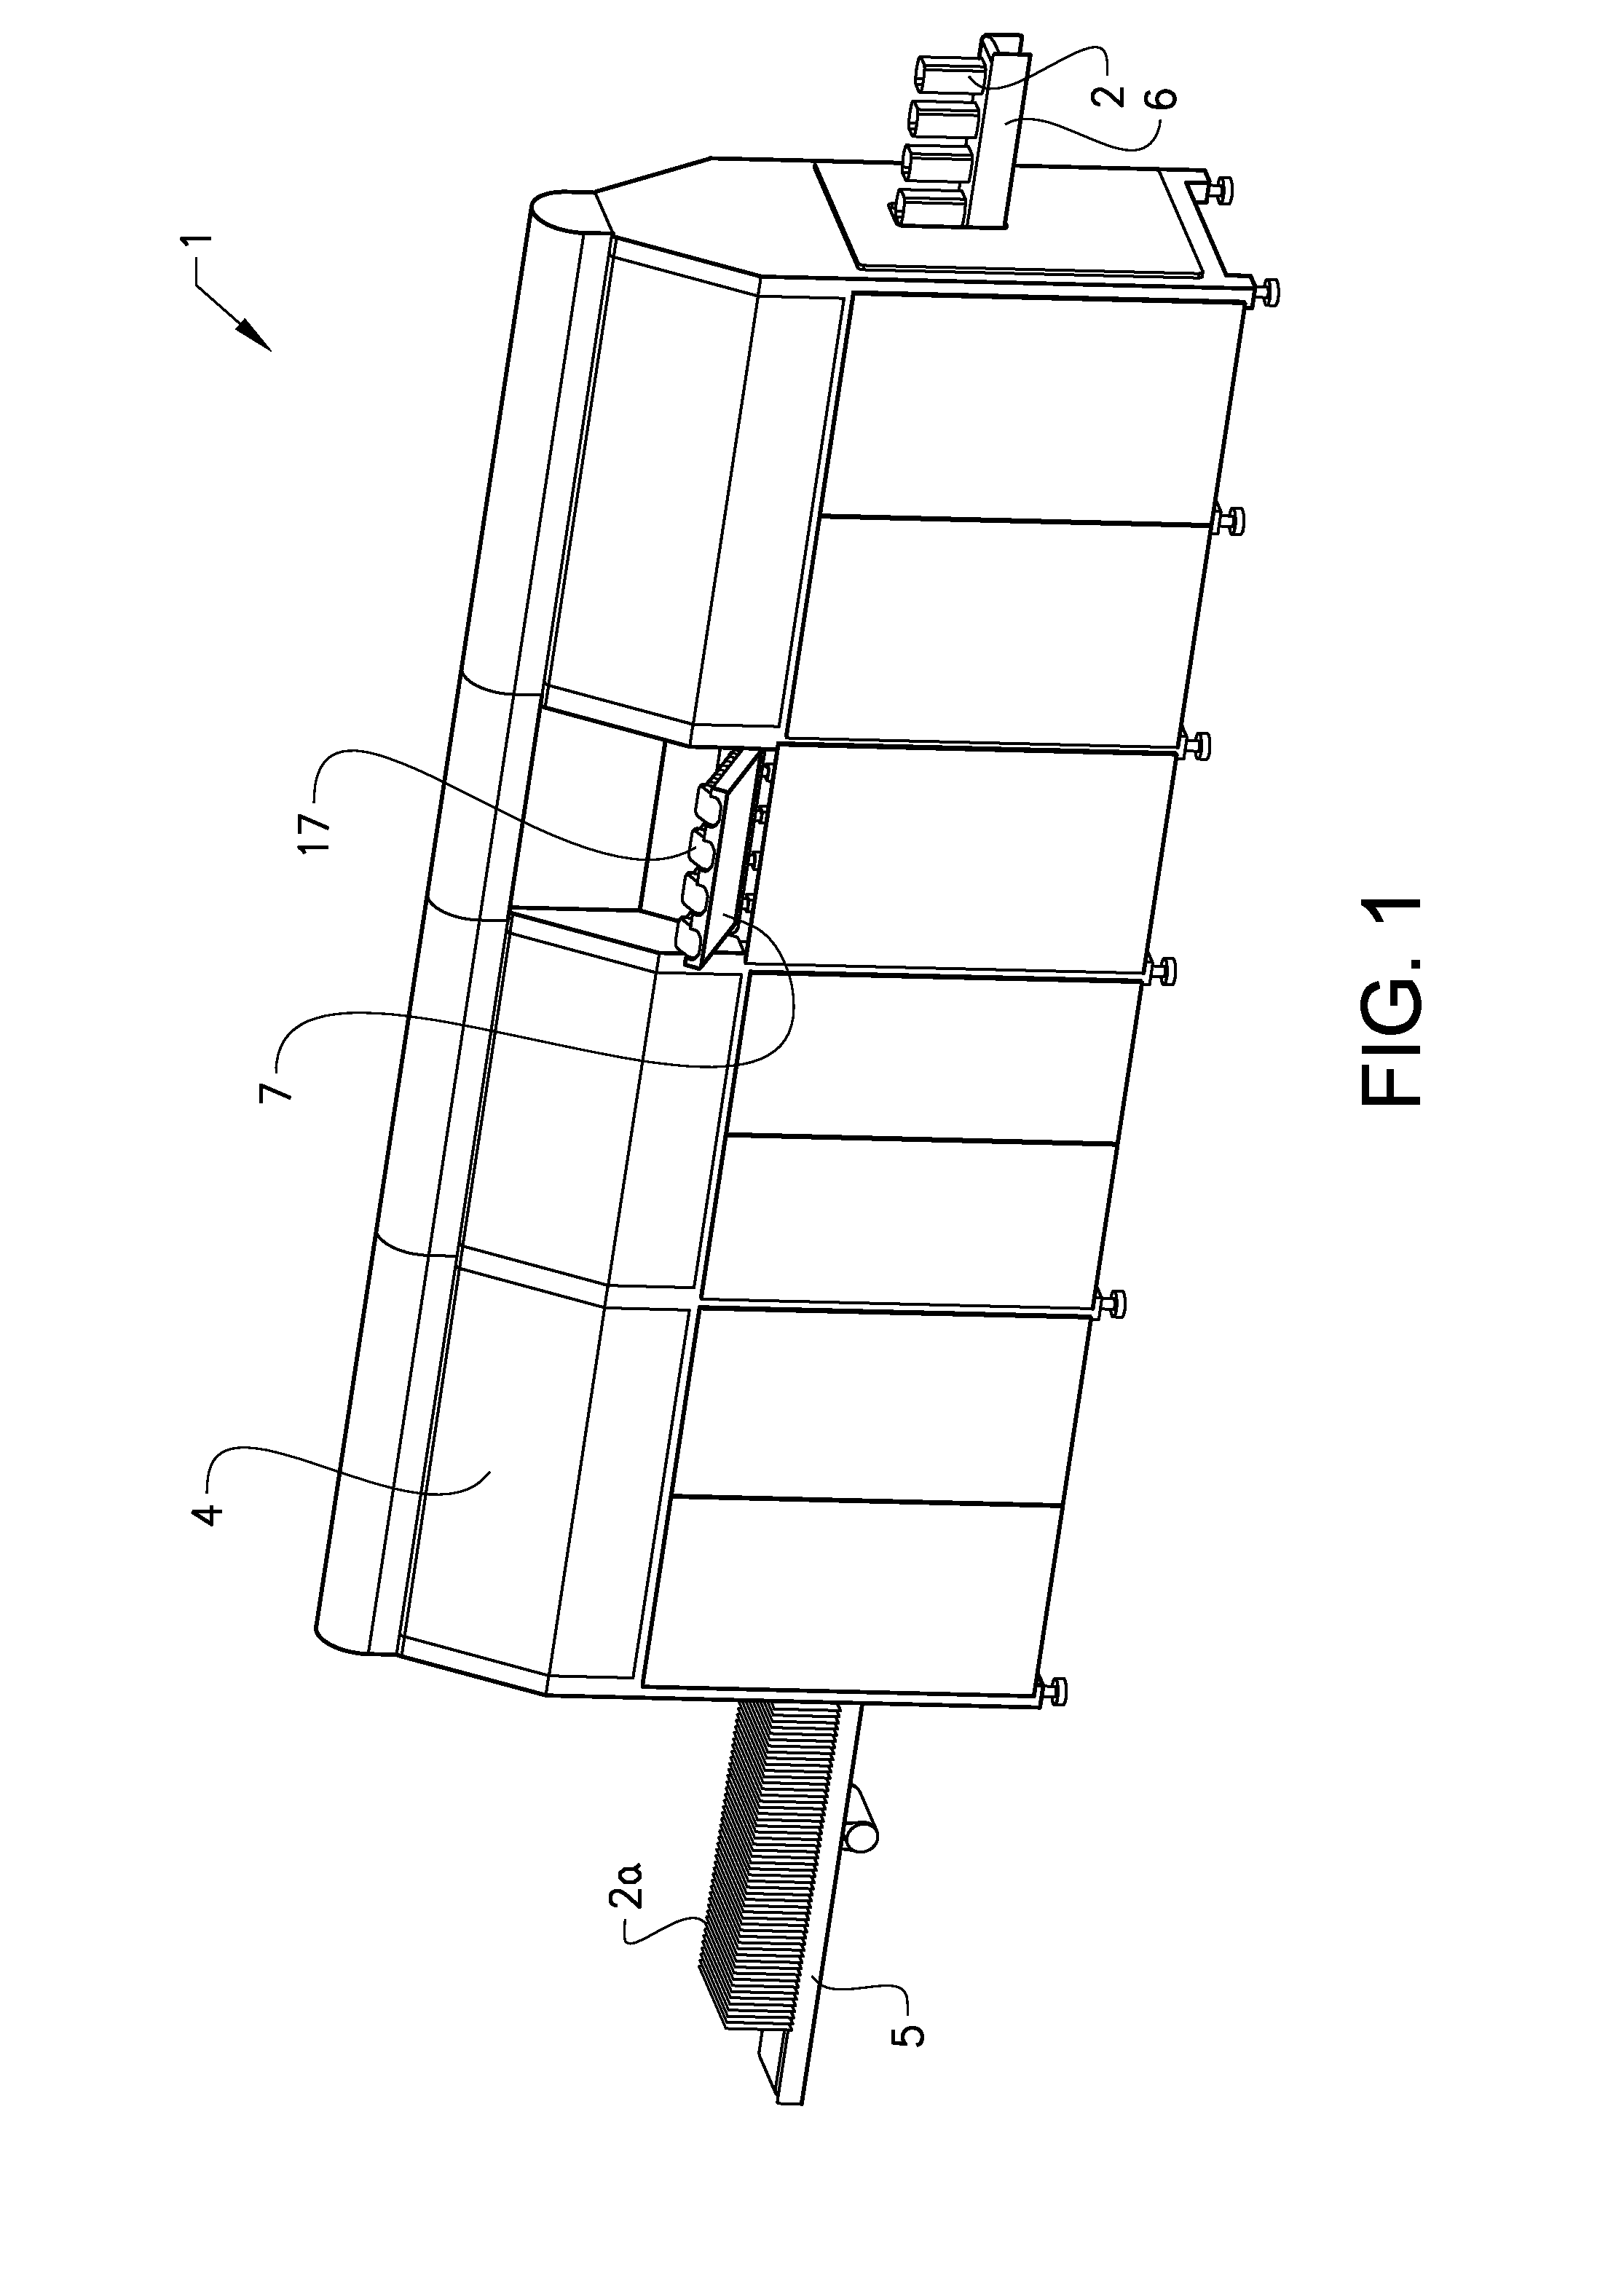 Apparatus and method for manufacturing of containers